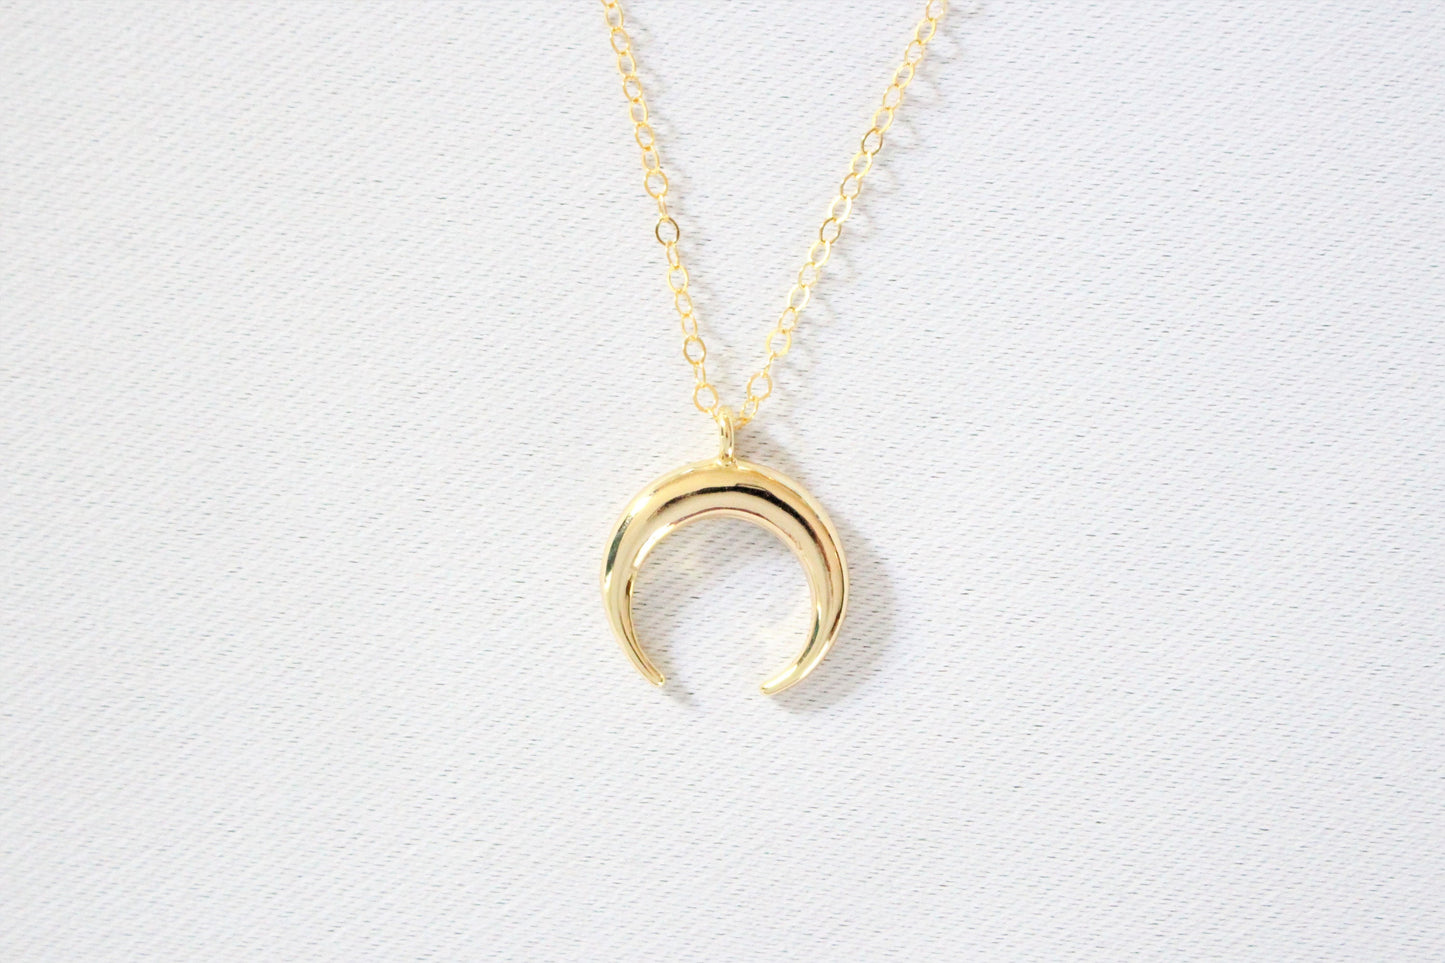 Double Horn Necklace ∙ 18K Crescent Horn Pendant and 14k Gold Filled chain ∙ Dainty Gold Moon ∙ Gift for her ∙ Boho necklace